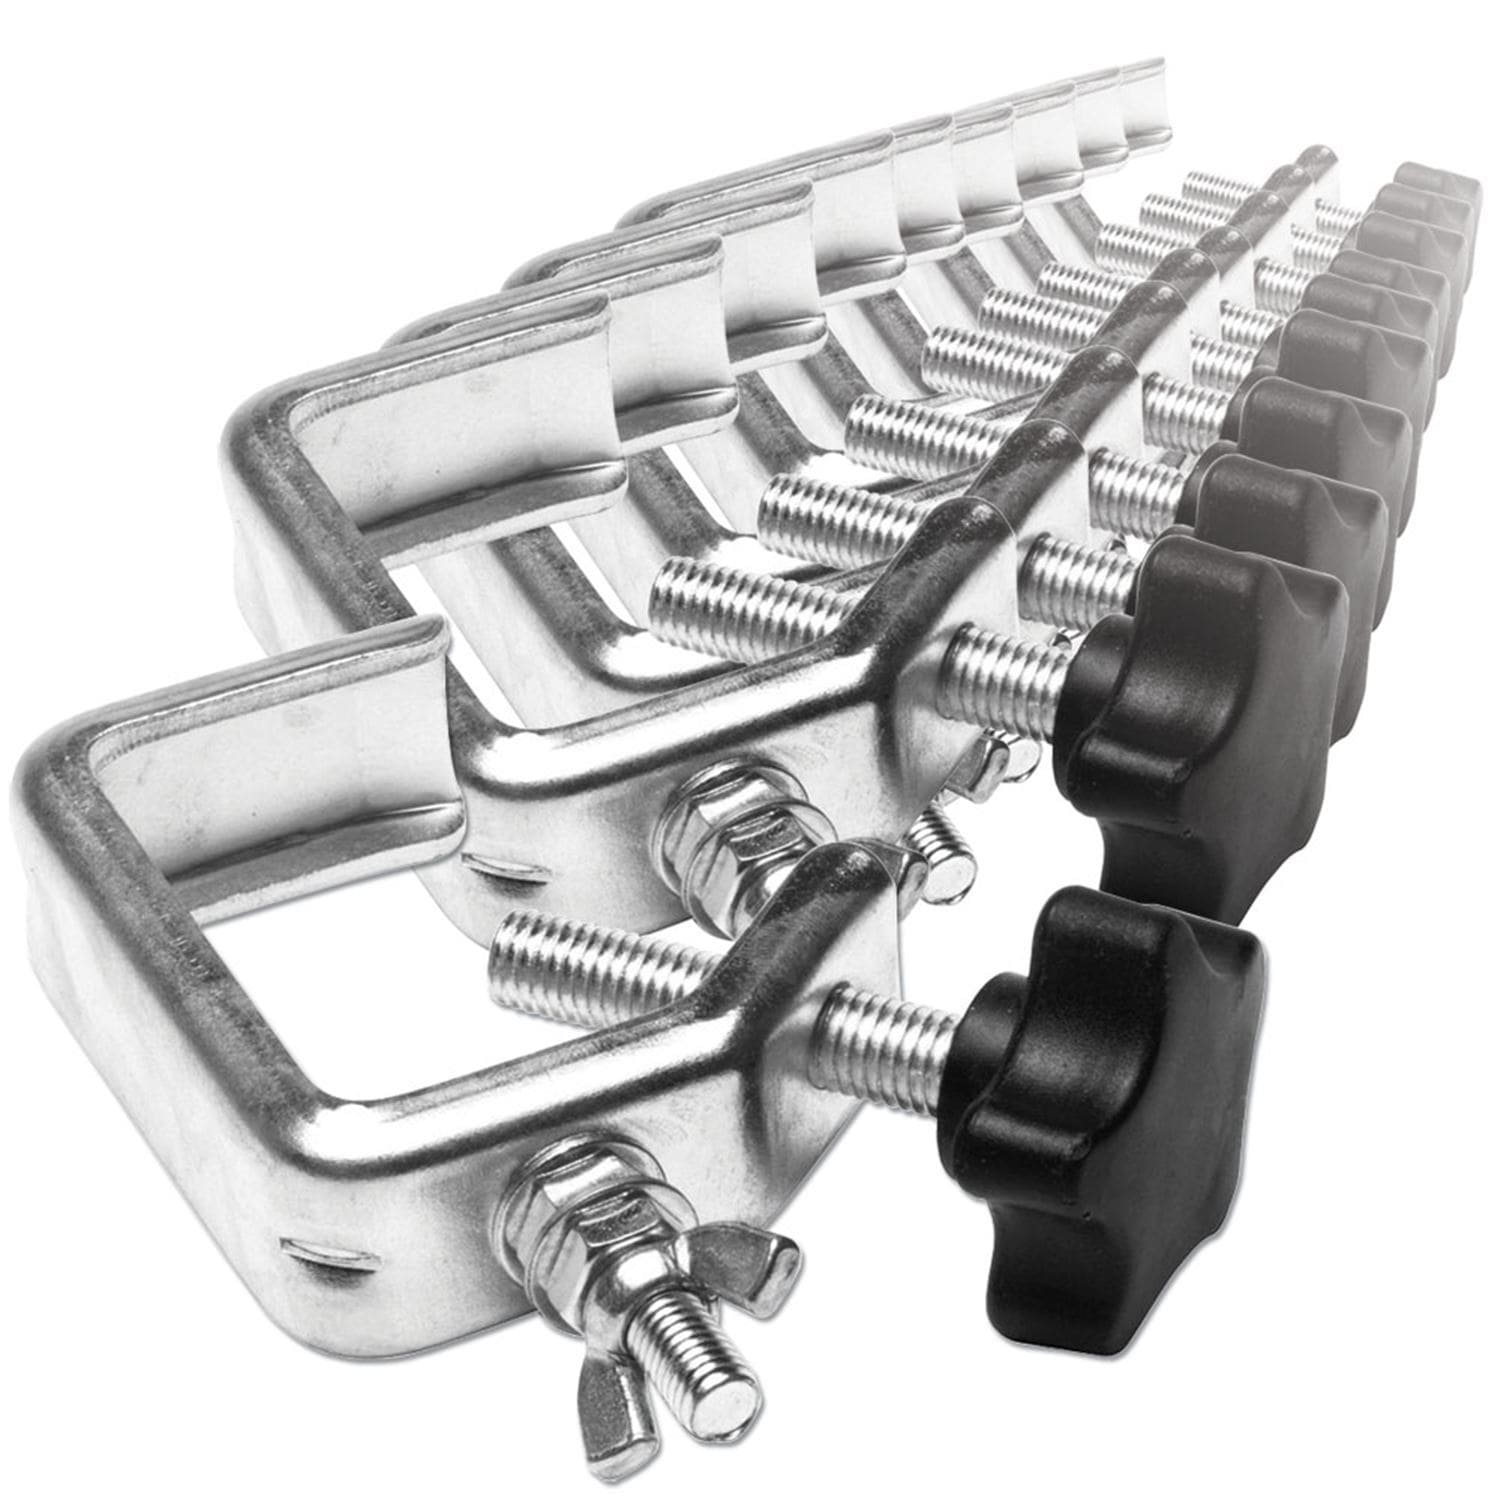 10 Pack Of Lighting Baby Clamps - ProSound and Stage Lighting